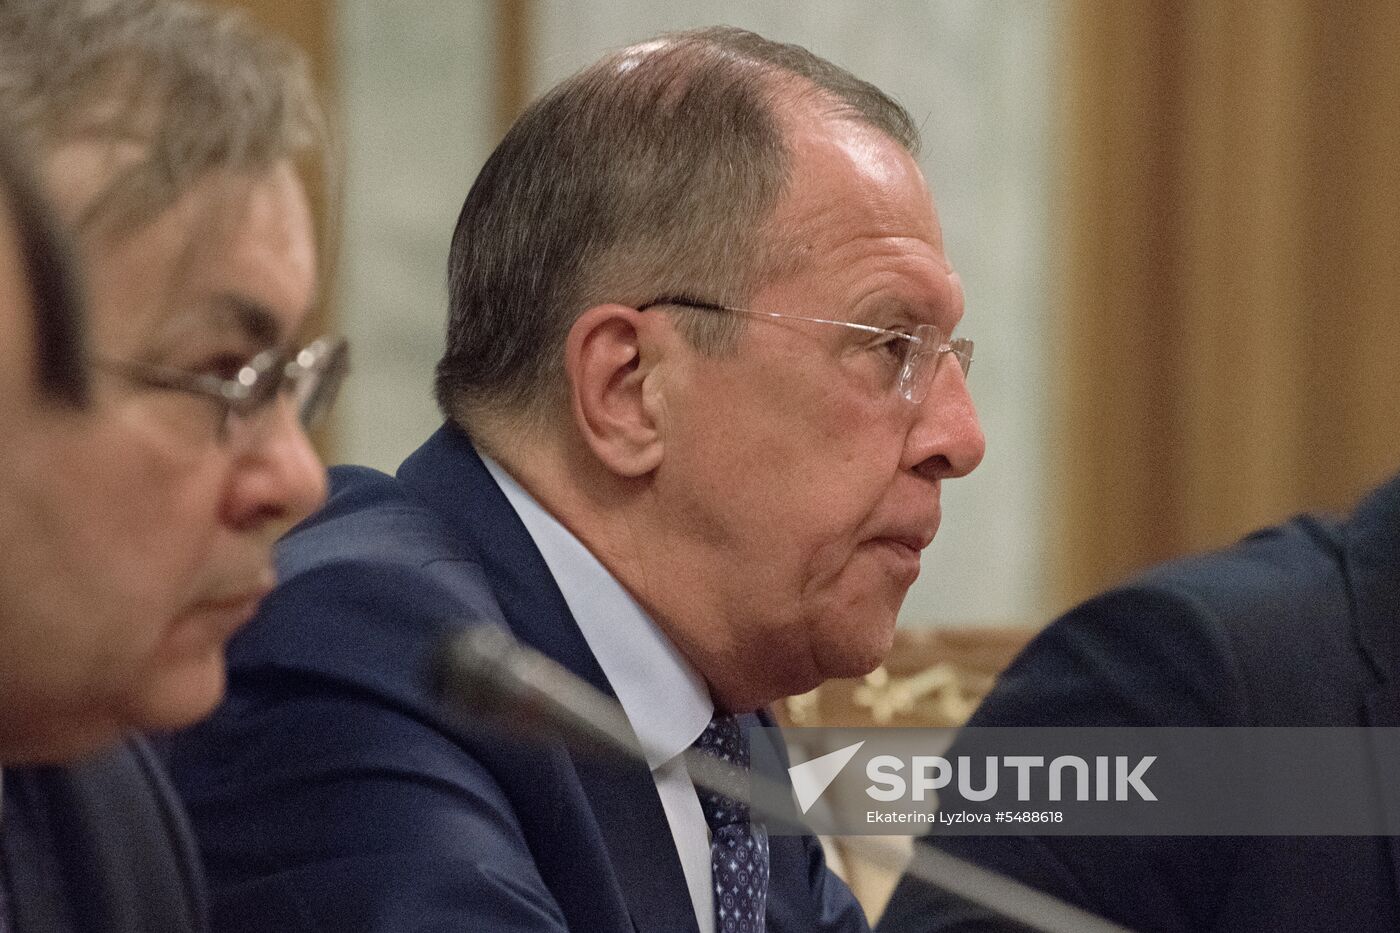 Russian Foreign Minister Sergei Lavrov meets with his counterpart from Hashemite Kingdom of Jordan Ayman Safadi